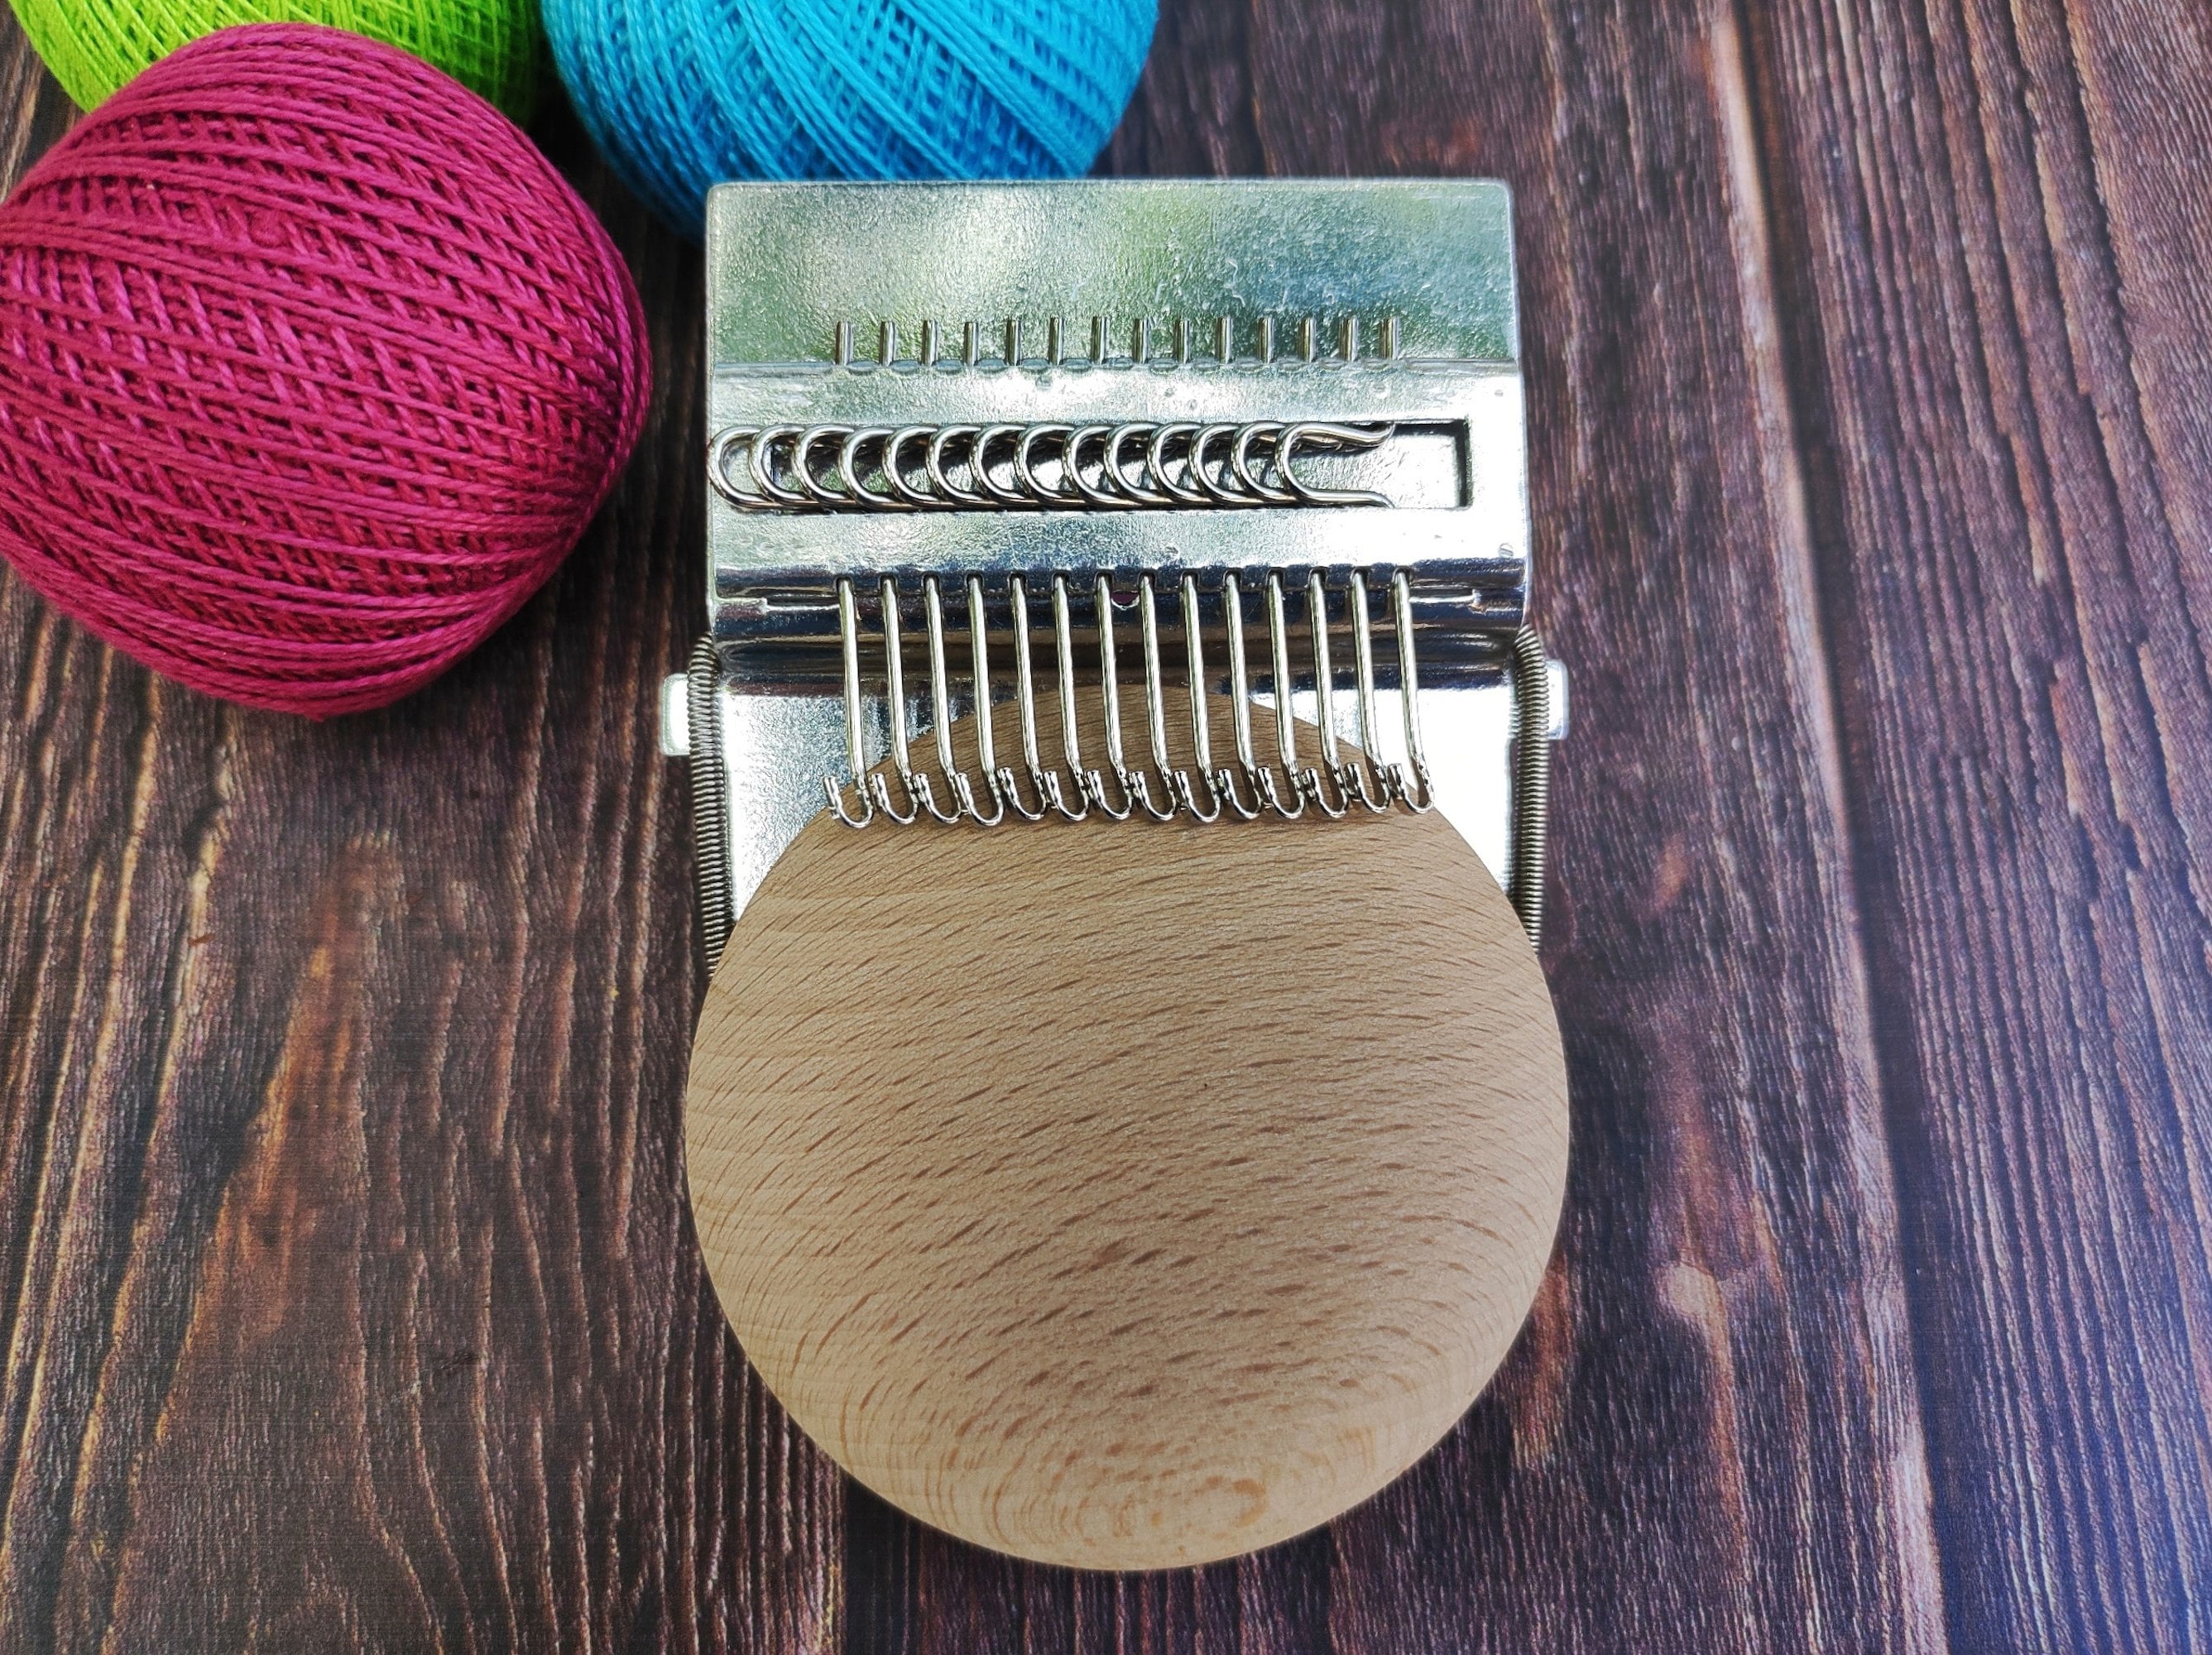 The Shapely Loom: Innovations for Loom Knitting 